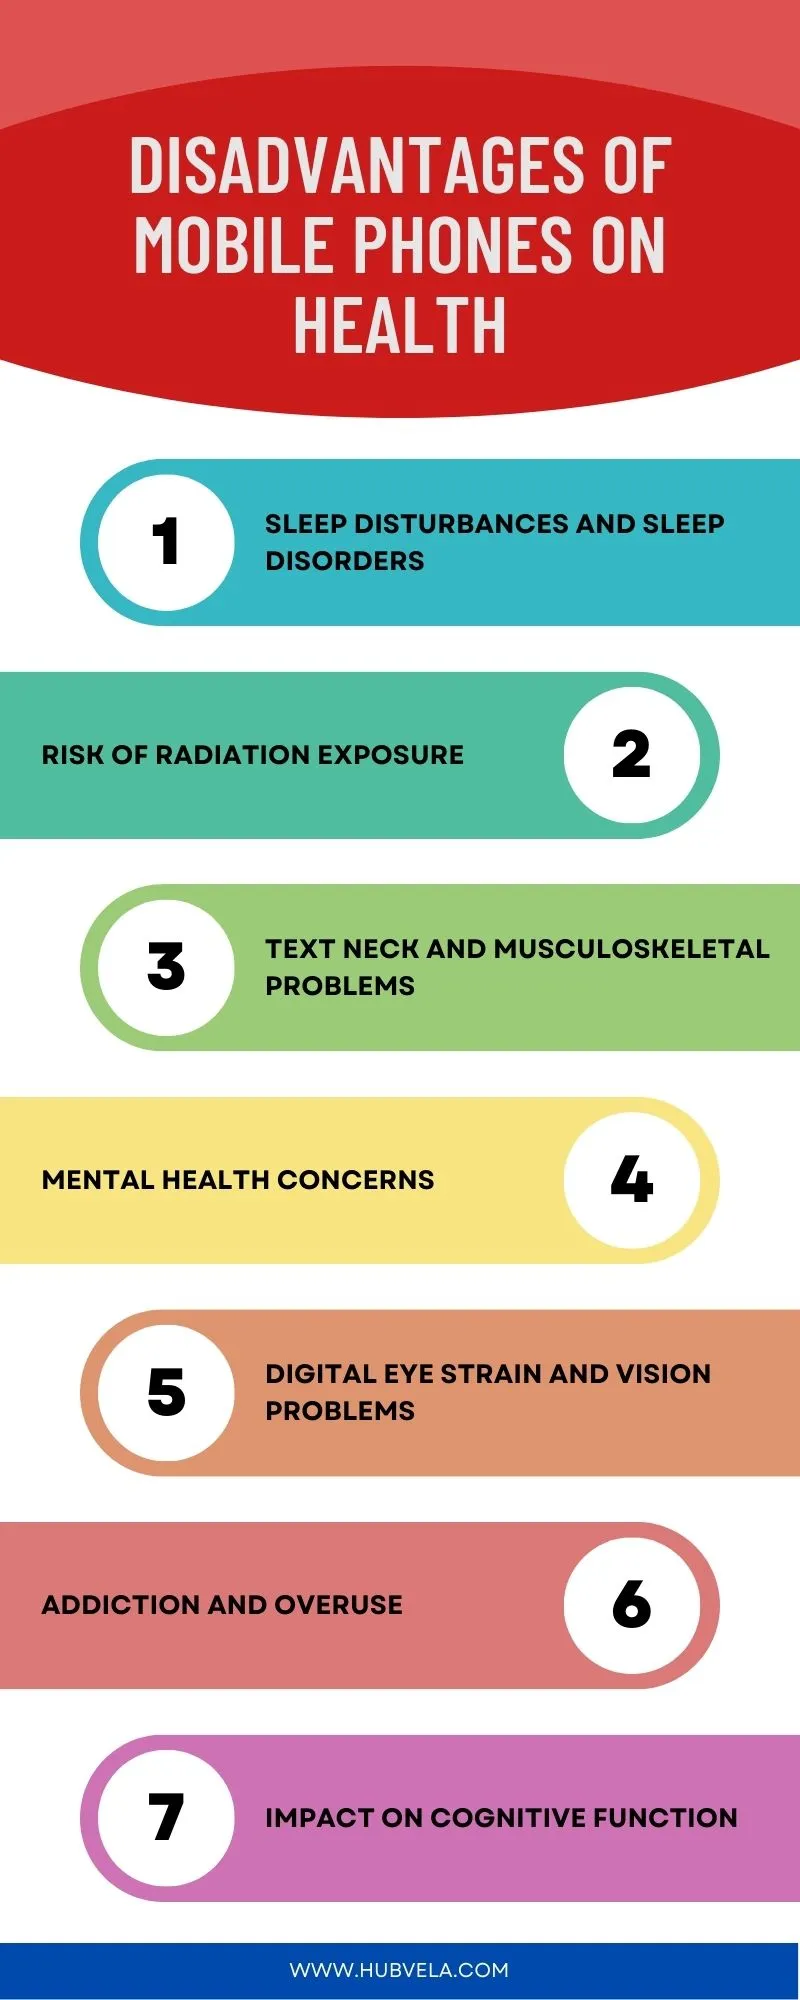 Disadvantages of Mobile Phones on Health Infographic